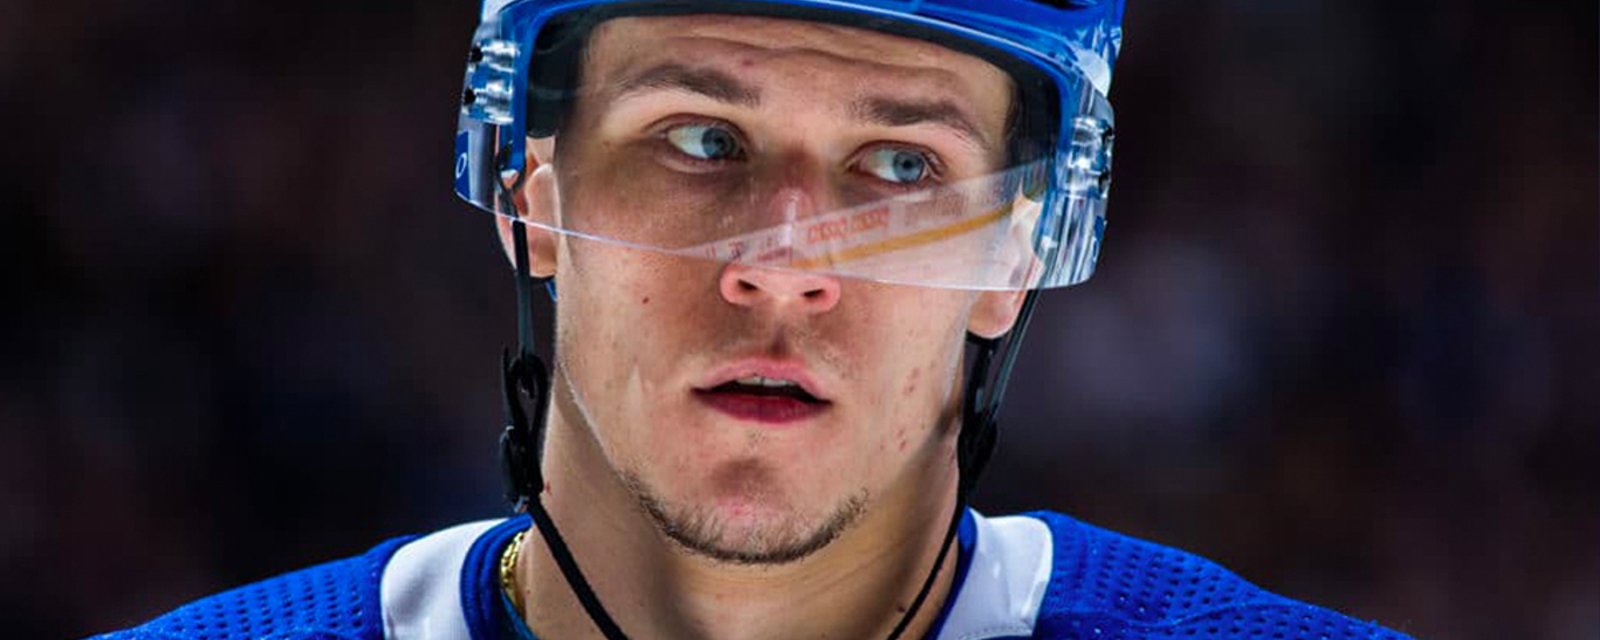 NHL GM comments on Zaitsev trade negotiations